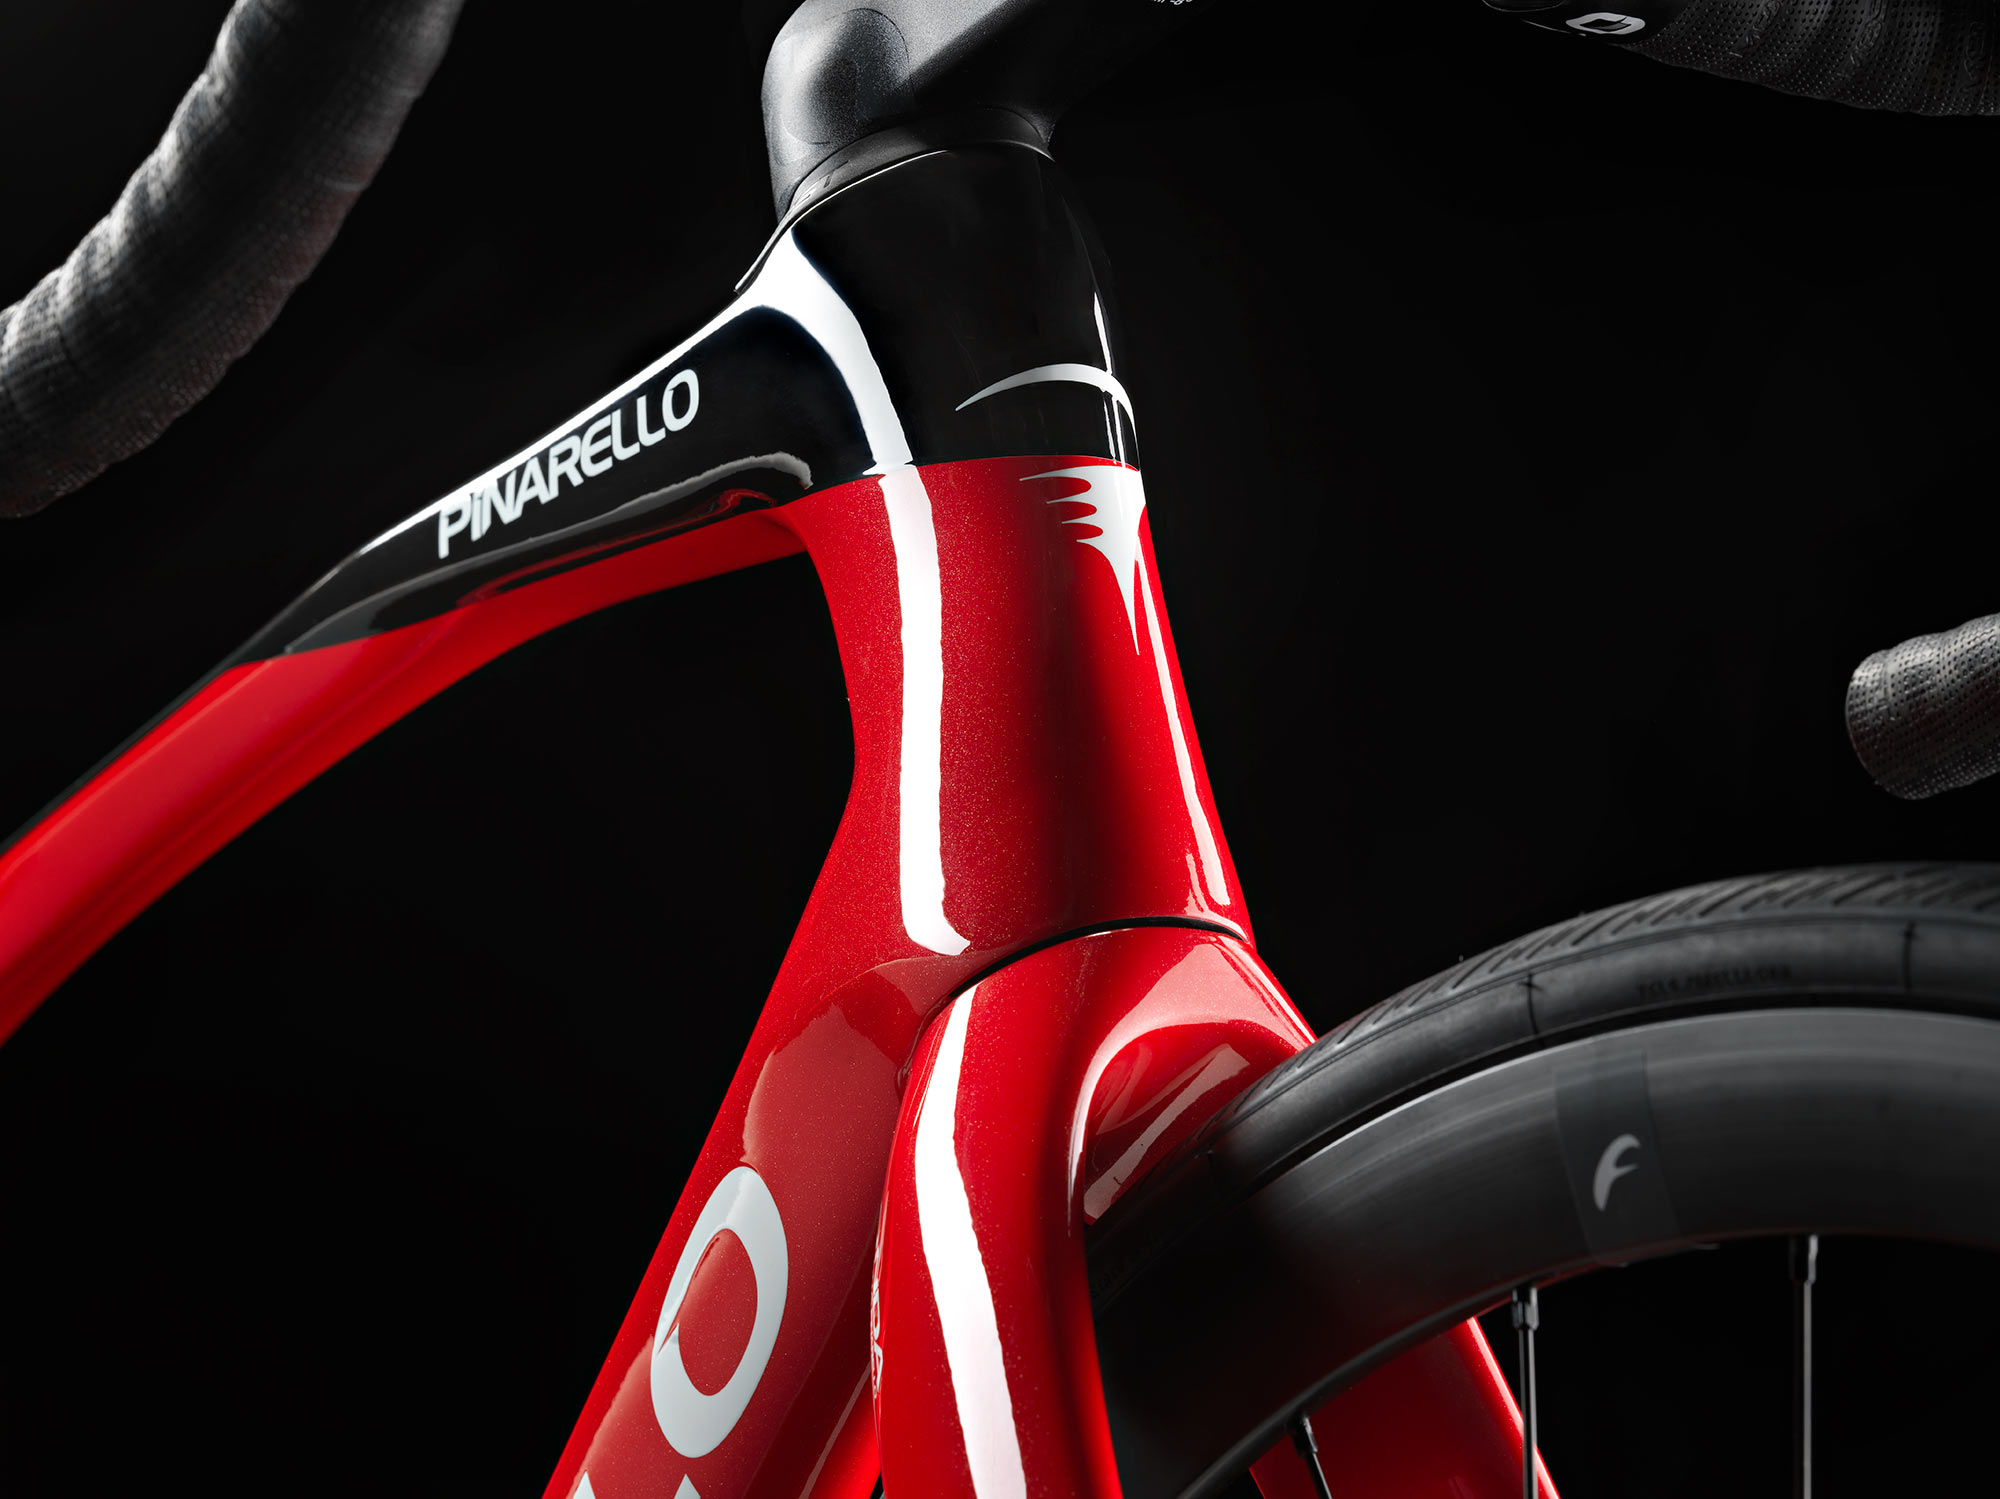 Pinarello X all-road bike reshapes performance into long-distance ...